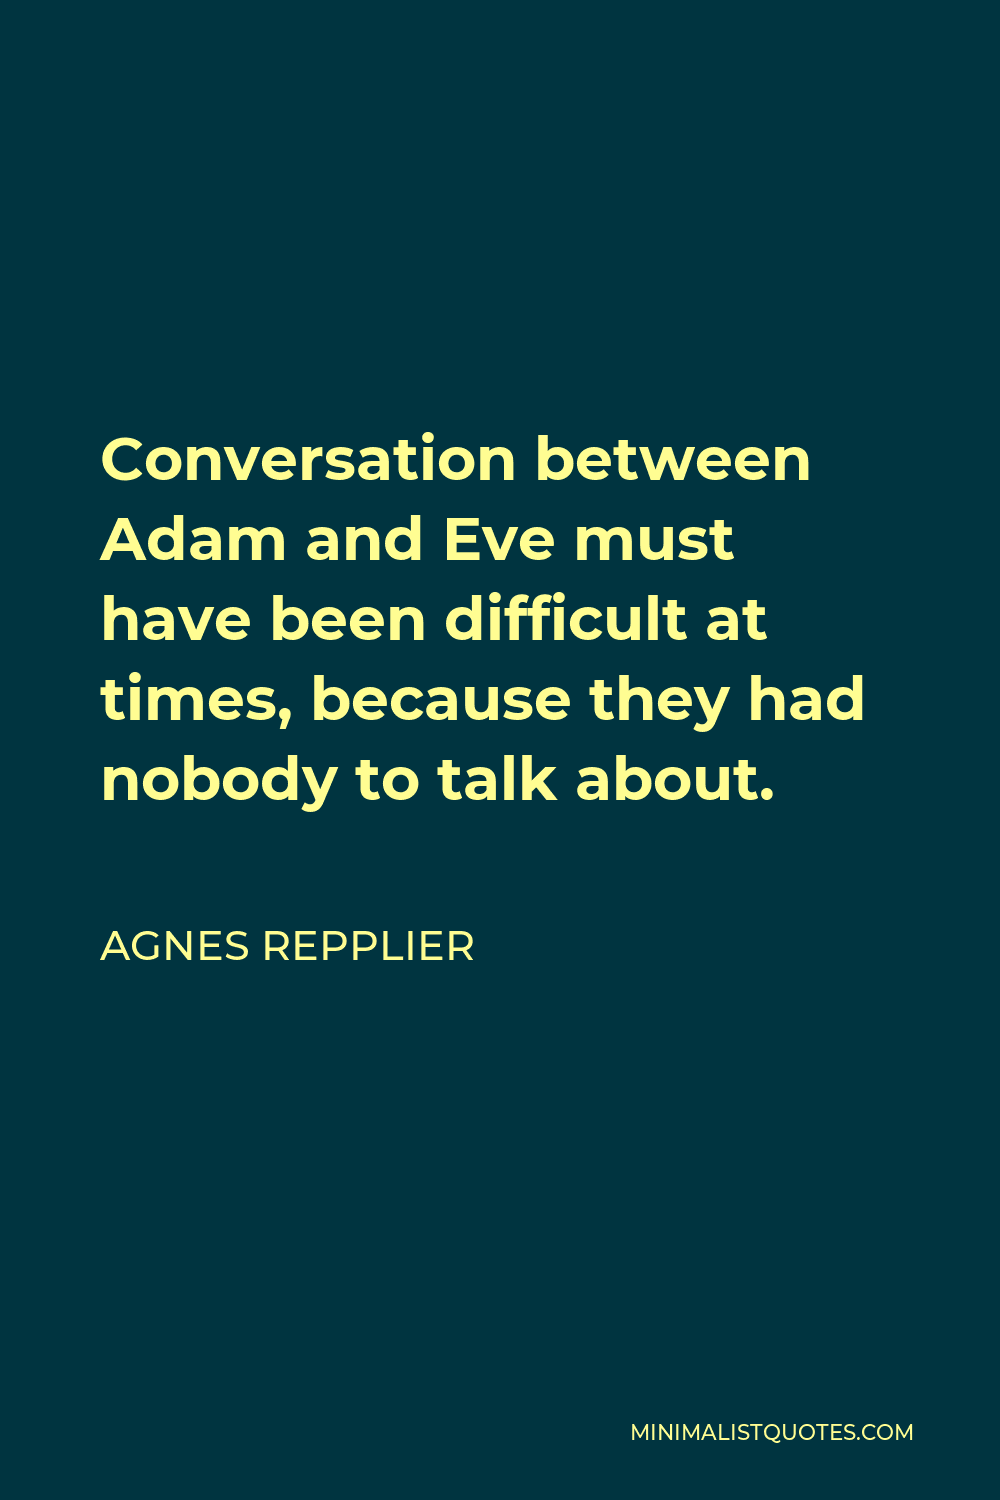 Agnes Repplier Quote - Conversation between Adam and Eve must have been difficult at times, because they had nobody to talk about.